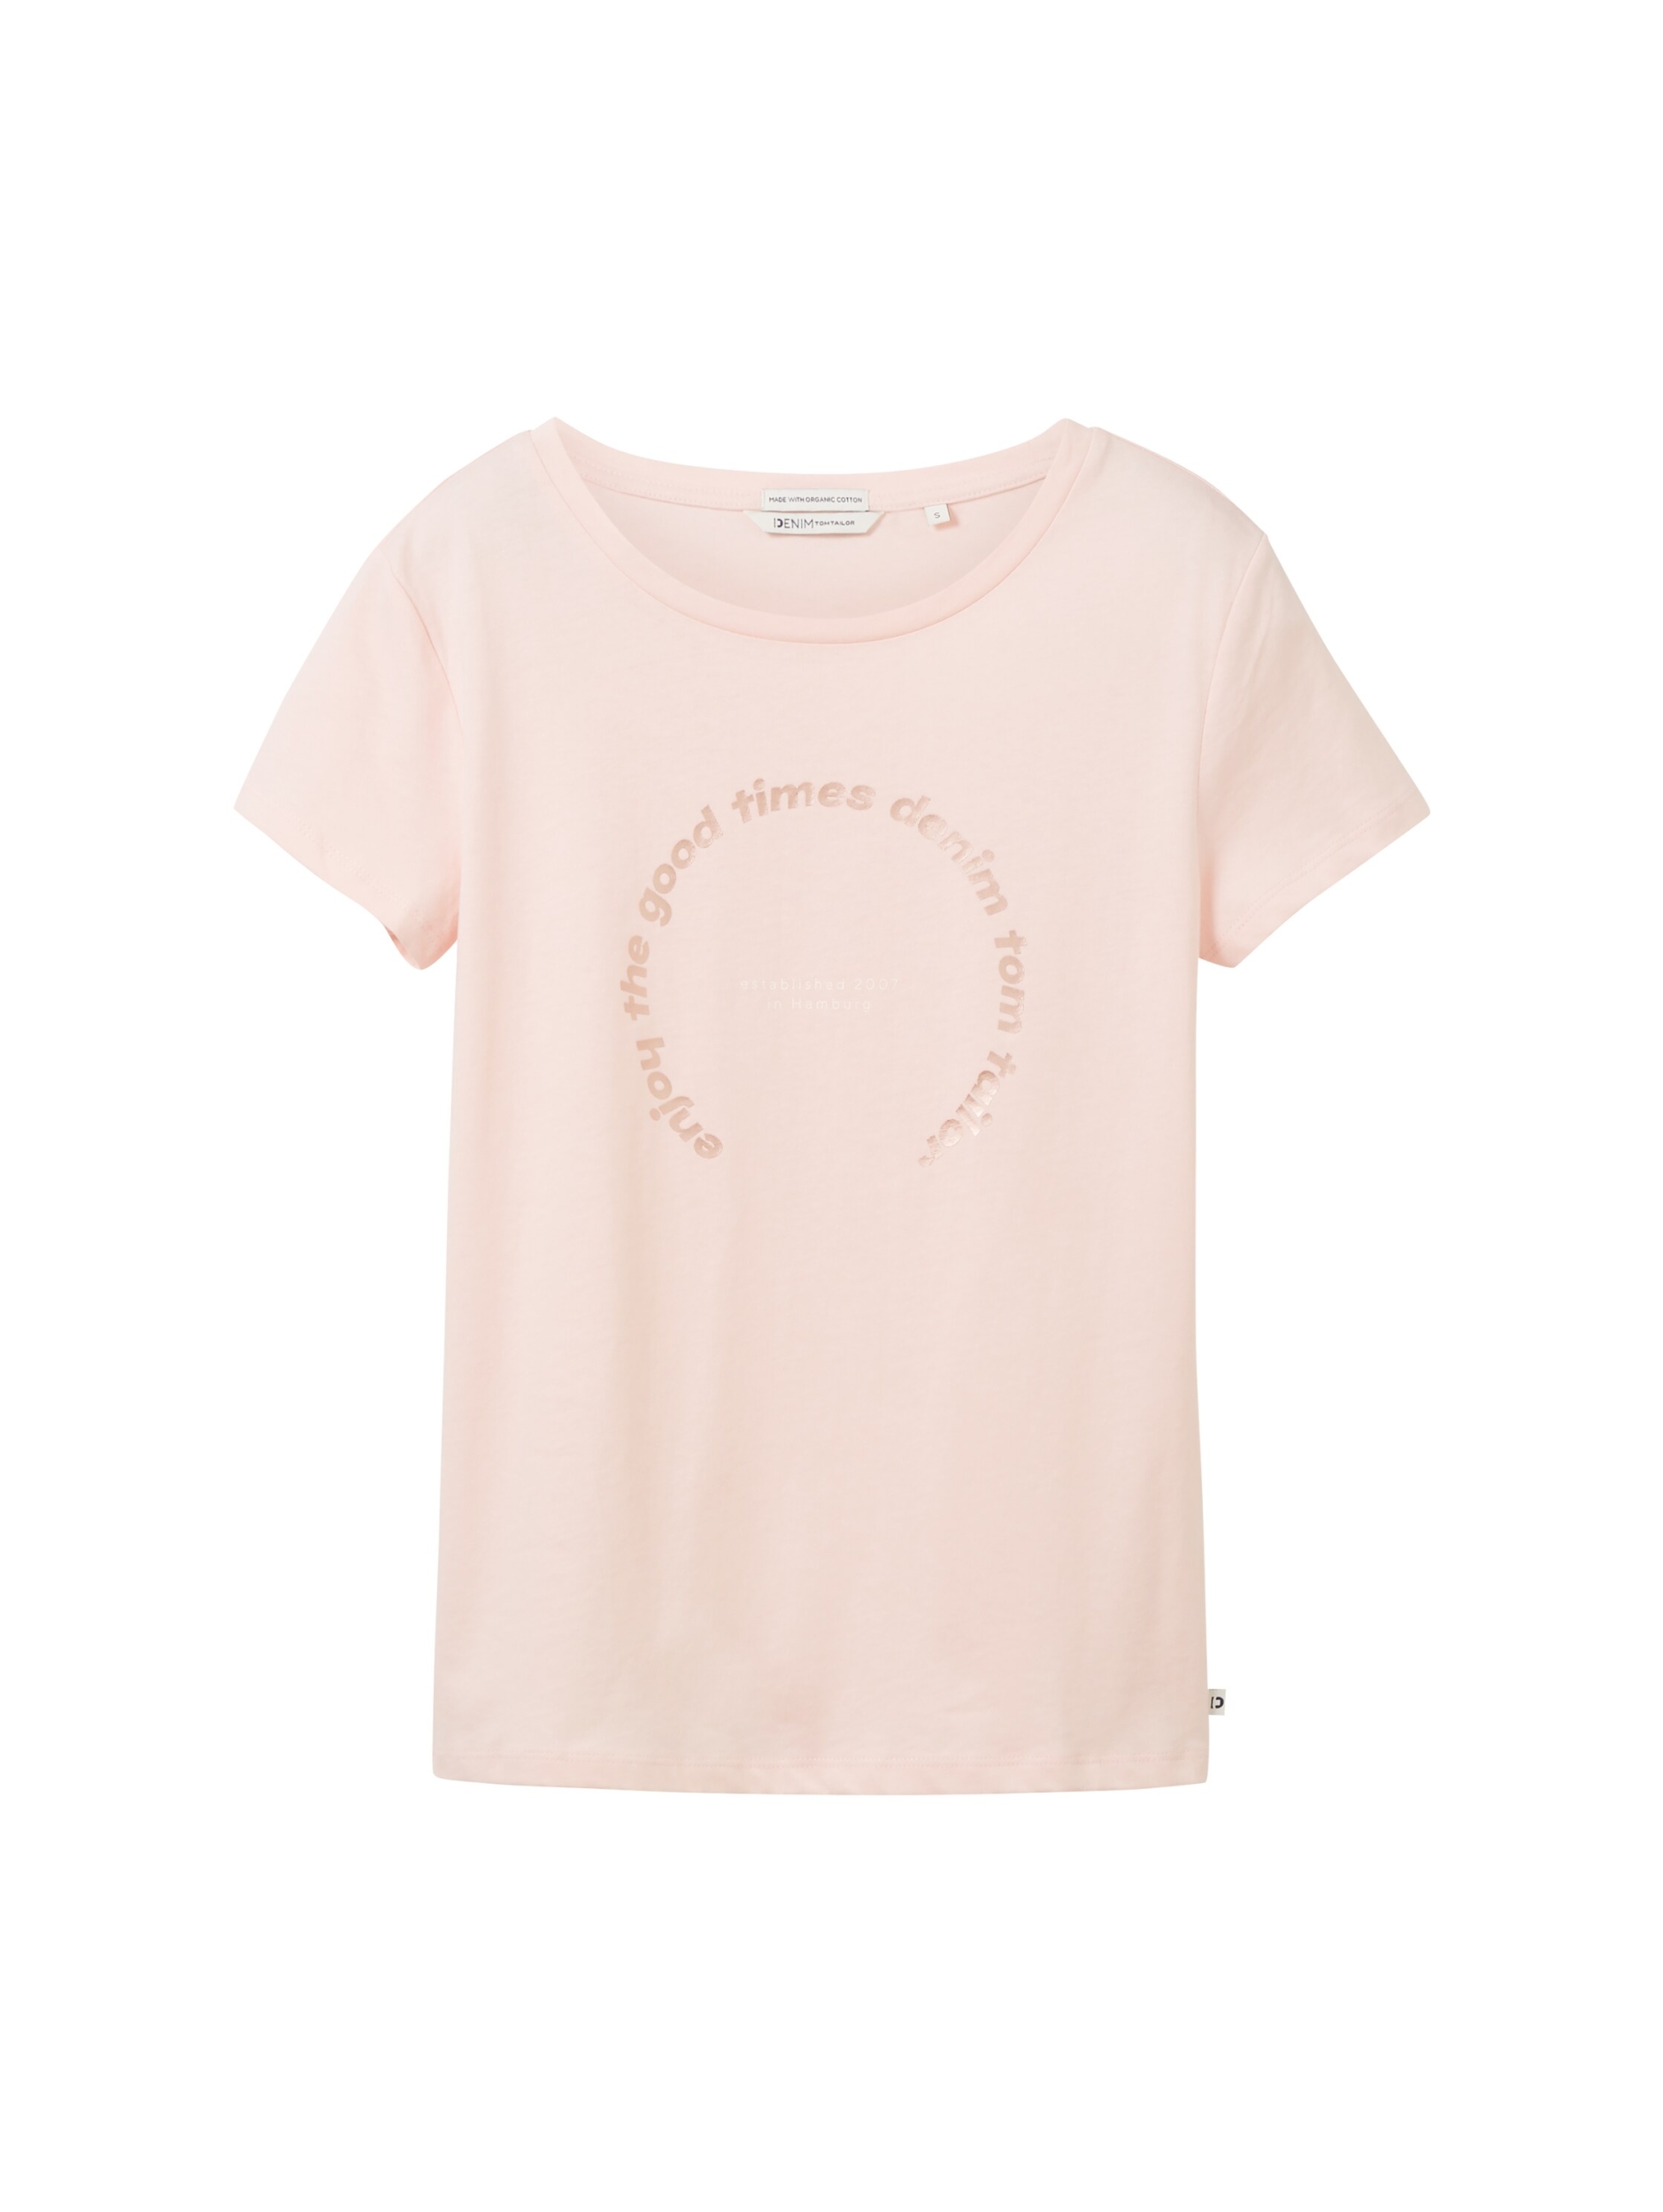 print | with | light M 1038353-14557_Light-M T-shirt rose | english fitted